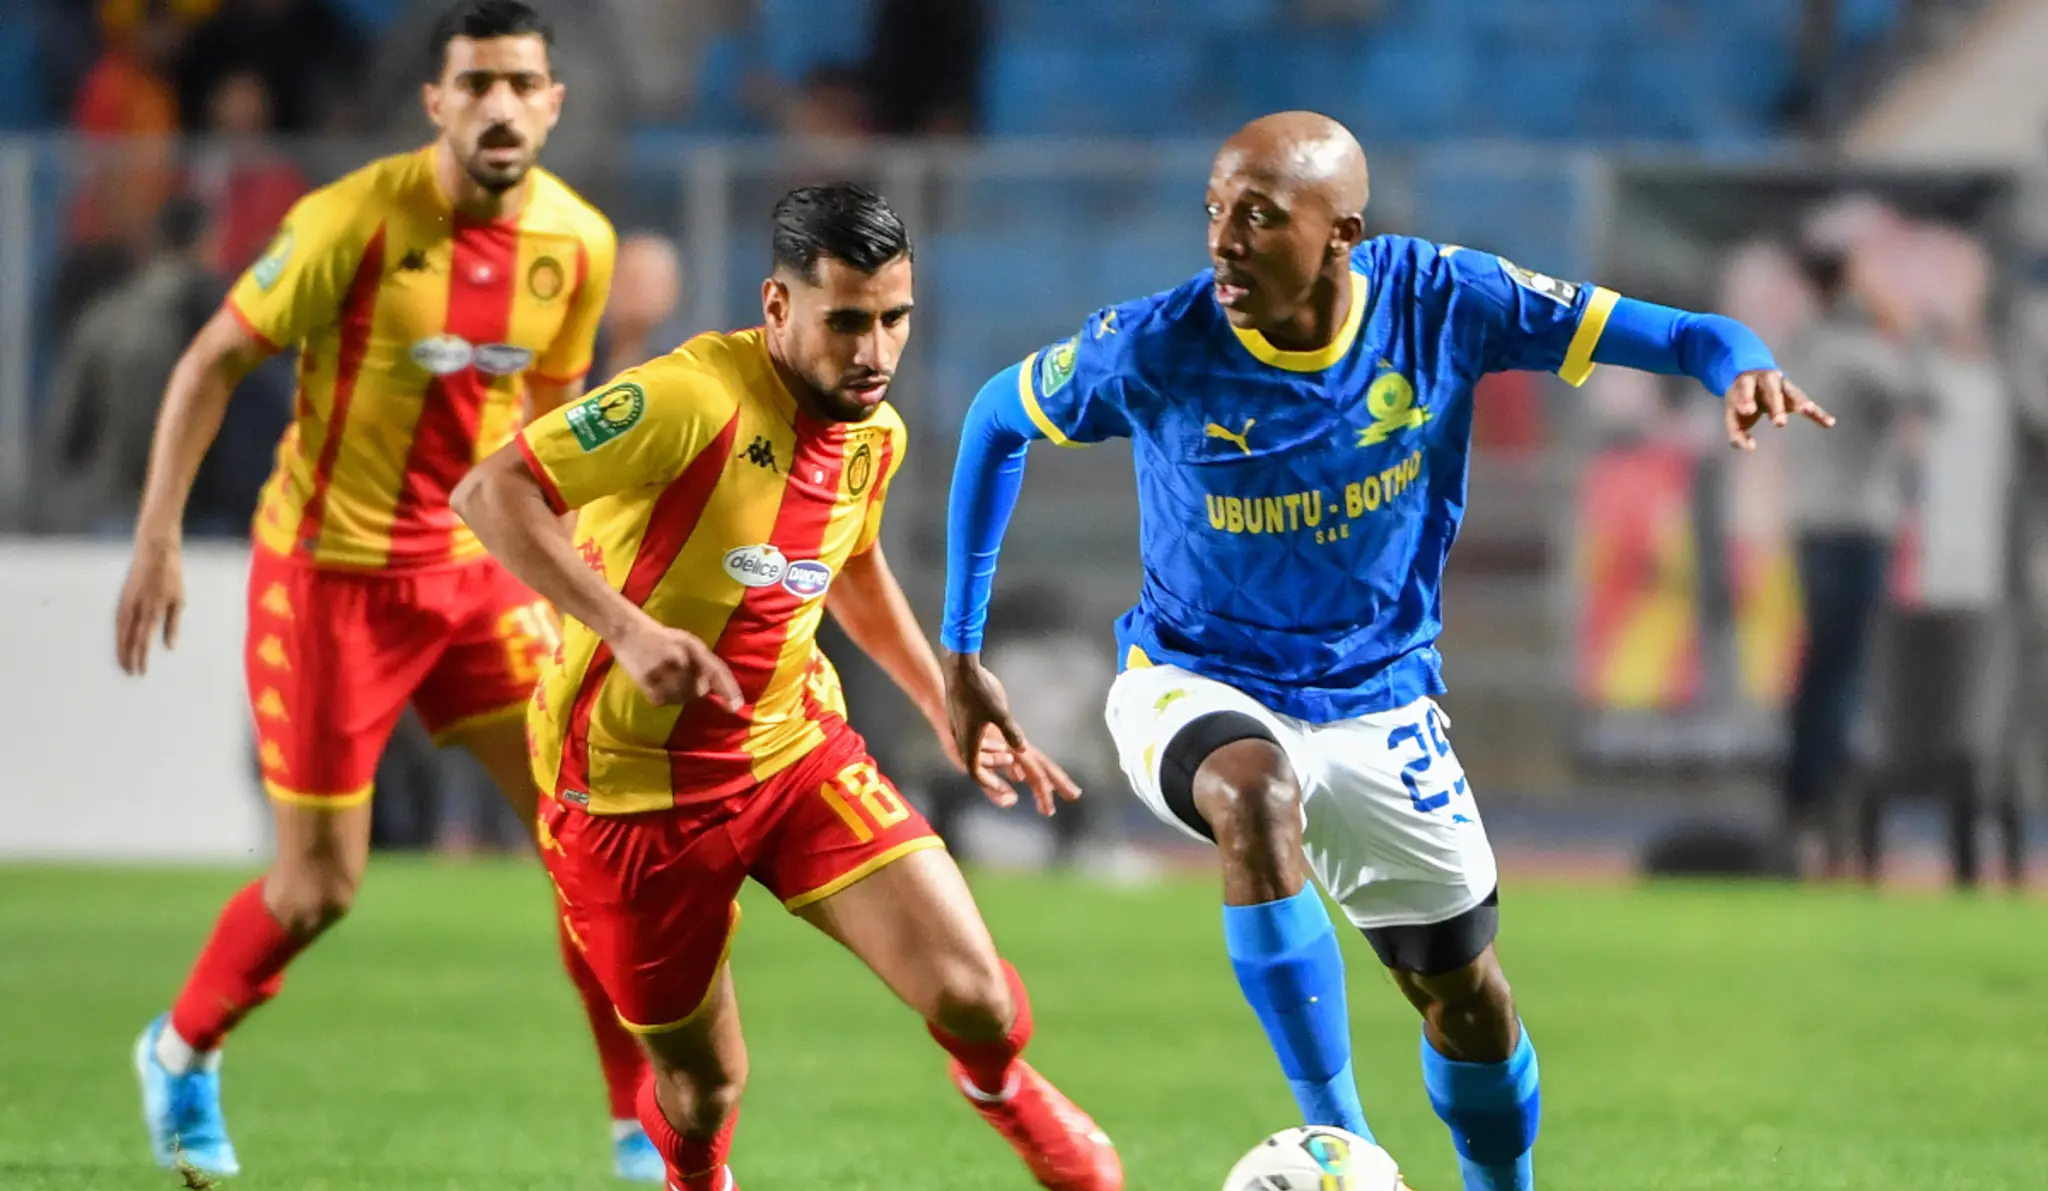 Esperance Hopes To Return By Qualifying From Sun Downs Square